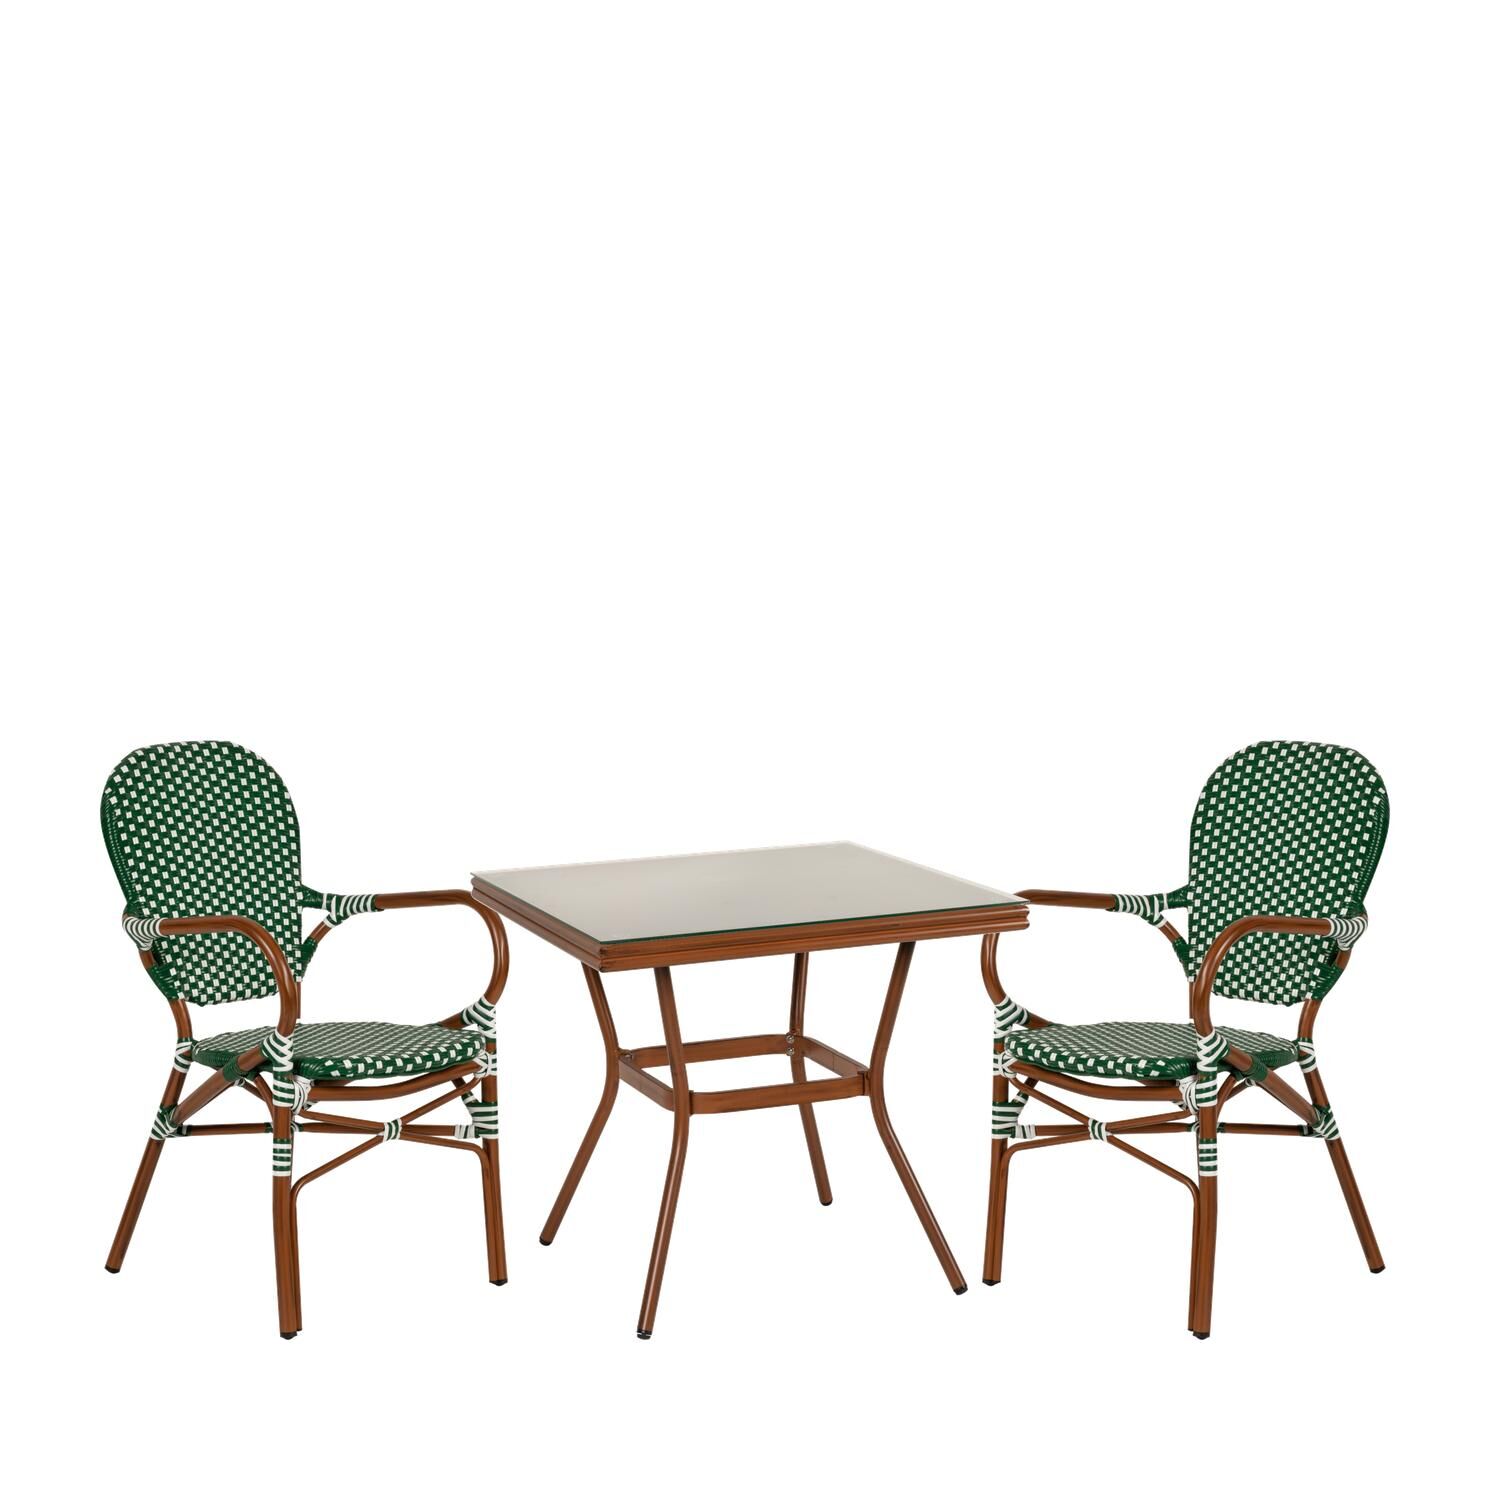 ANGOLA Garden Dining Set Bamboo Aluminum/Glass With 2 Chairs 14990226